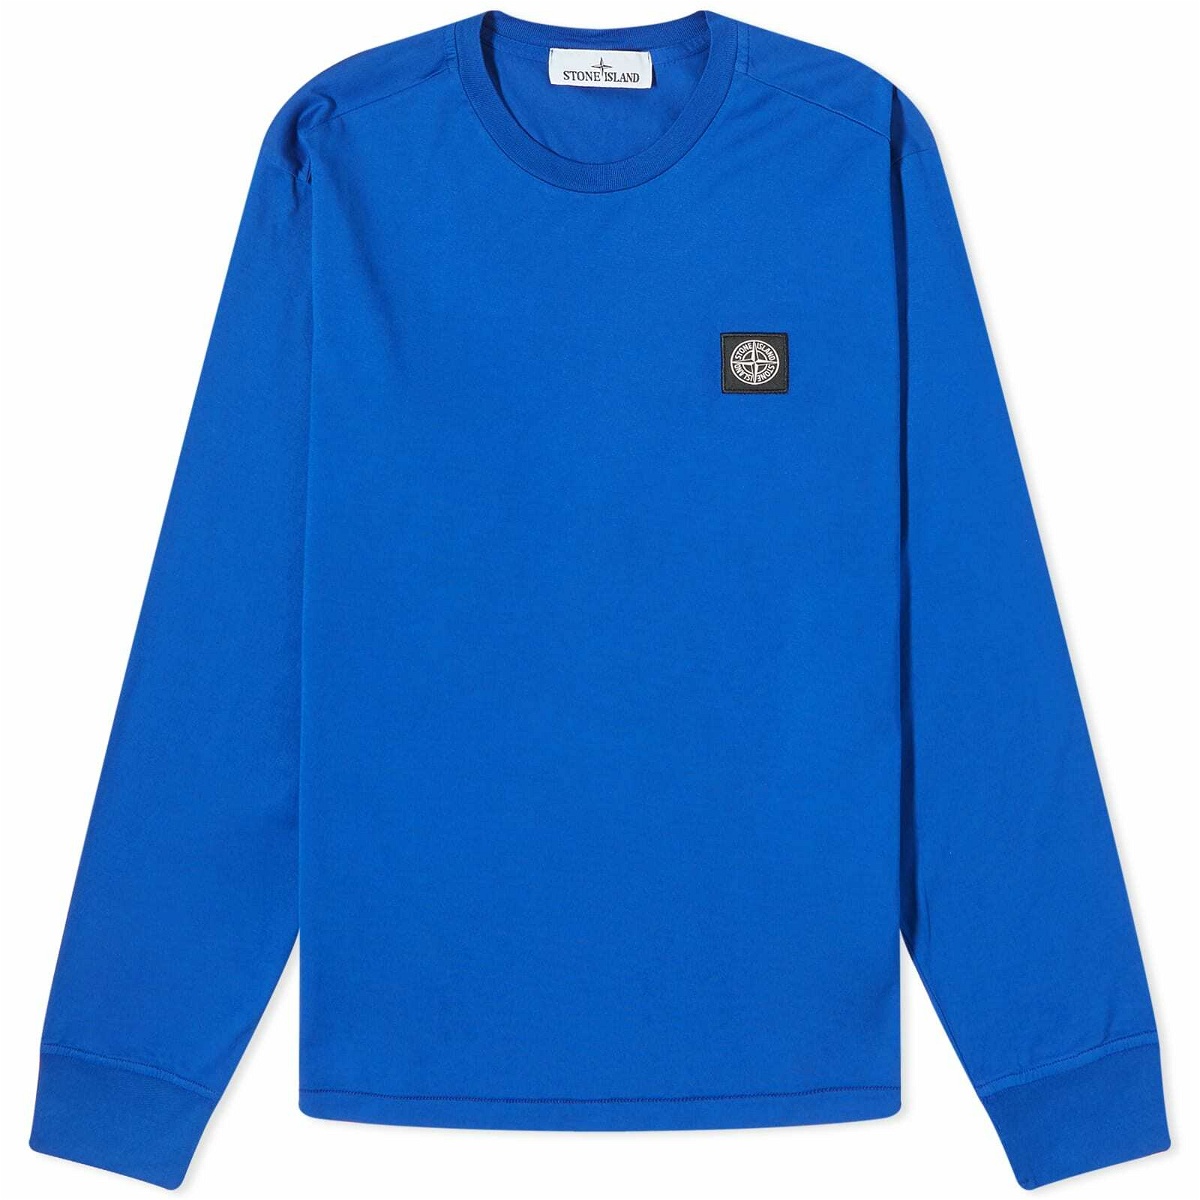 Photo: Stone Island Men's Long Sleeve Patch T-Shirt in Bright Blue